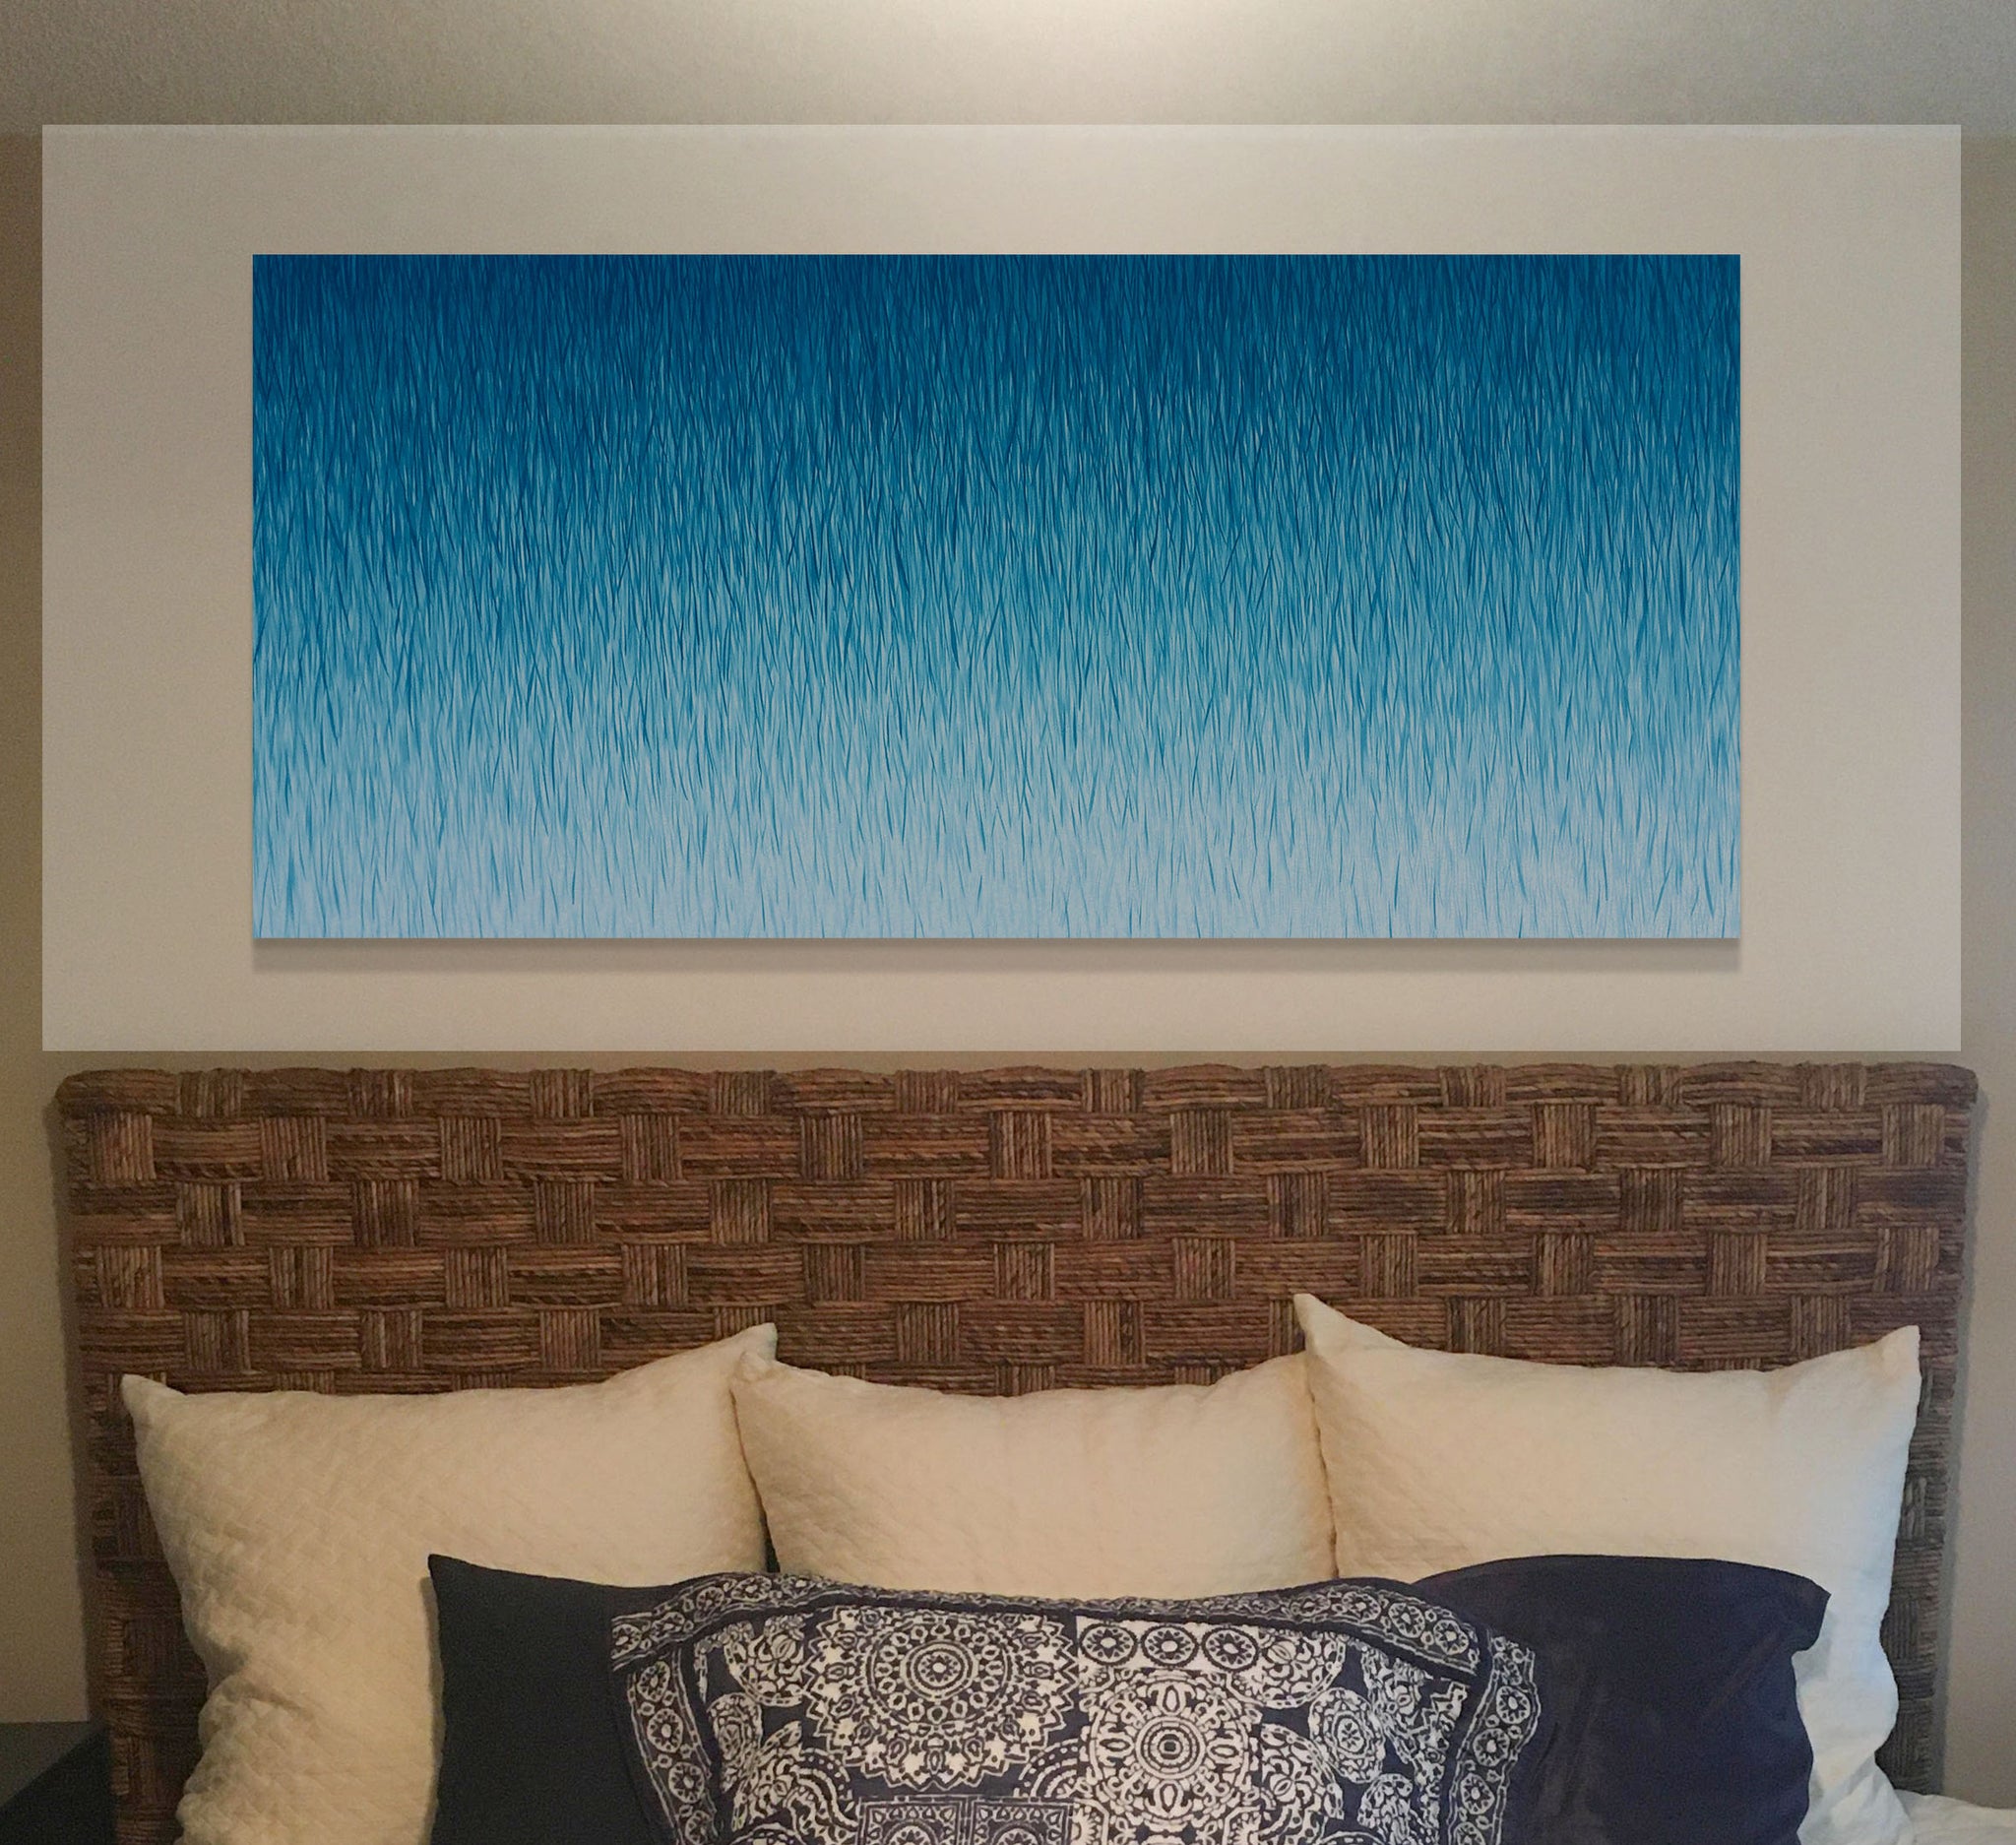 Silent Showers commission 152 x 70cm - George Hall